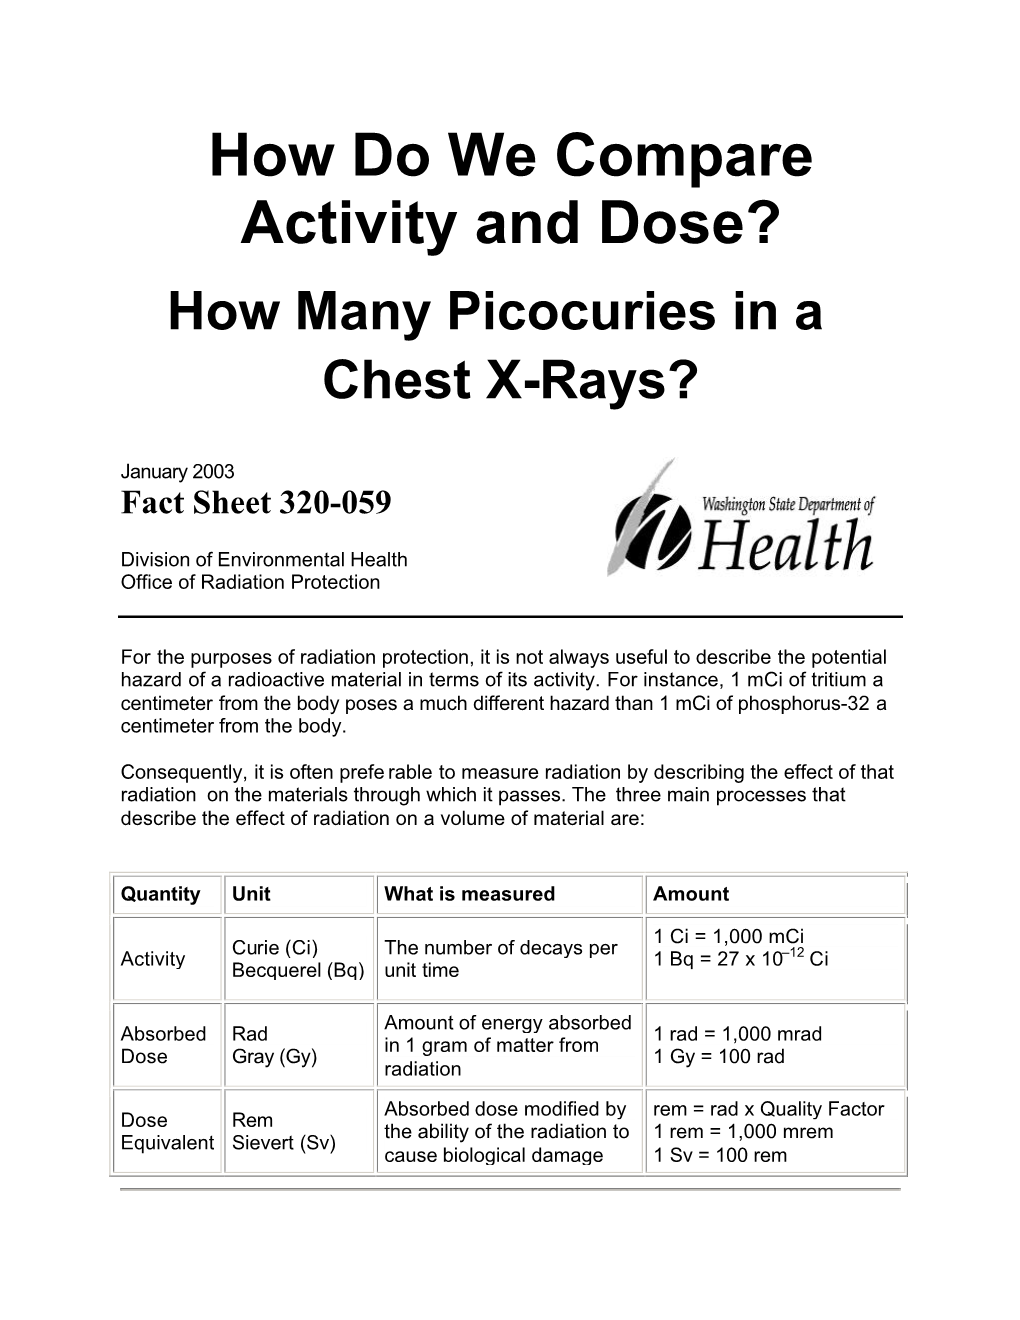 How Do We Compare Activity and Dose? How Many Picocuries in a Chest X-Rays?